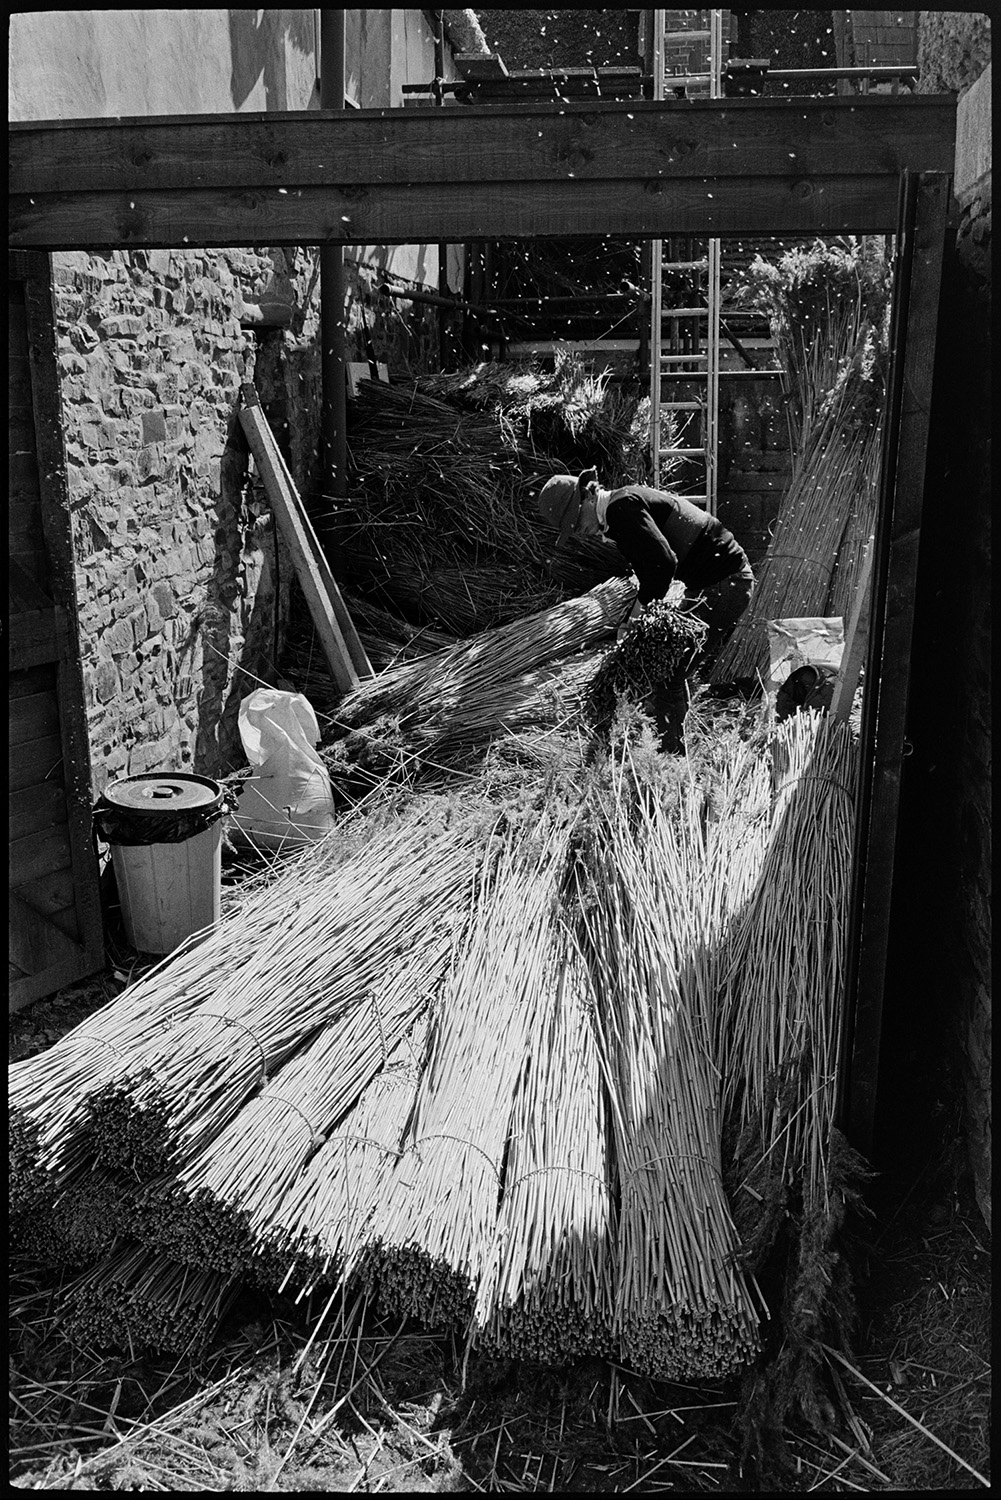 Thatching reed, thatcher taking it up to roof. Nitches. 
[A man picking up a nitch of reed to take up a ladder in the background to thatch a roof in Beaford. More bundles of reed are visible in the foreground.]